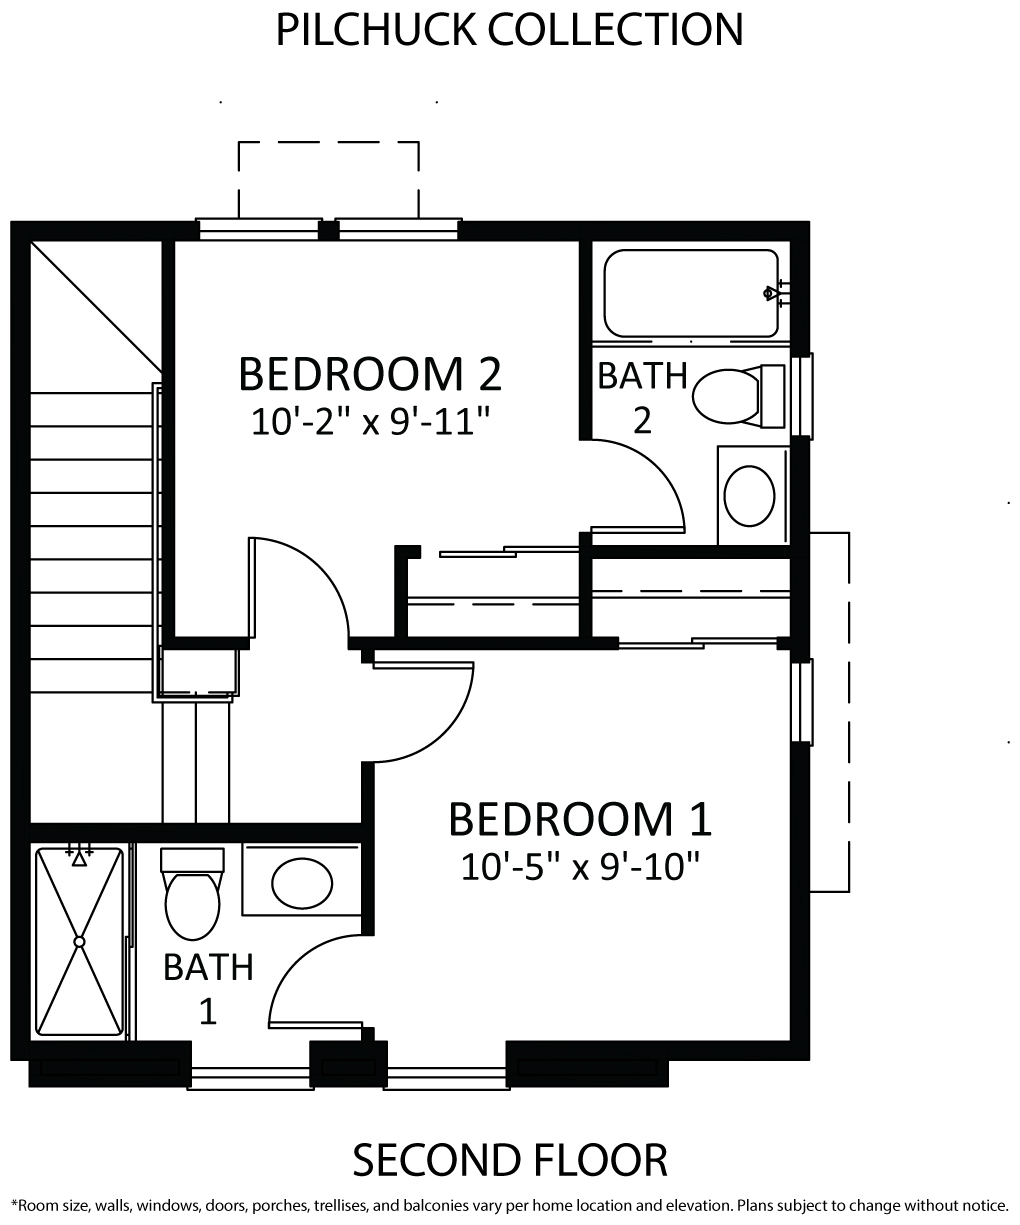 Floorplan 02. TJH_7745_14th_Ave_NW_A_Pilchuck_2.jpg for 7745 14th Avenue NW